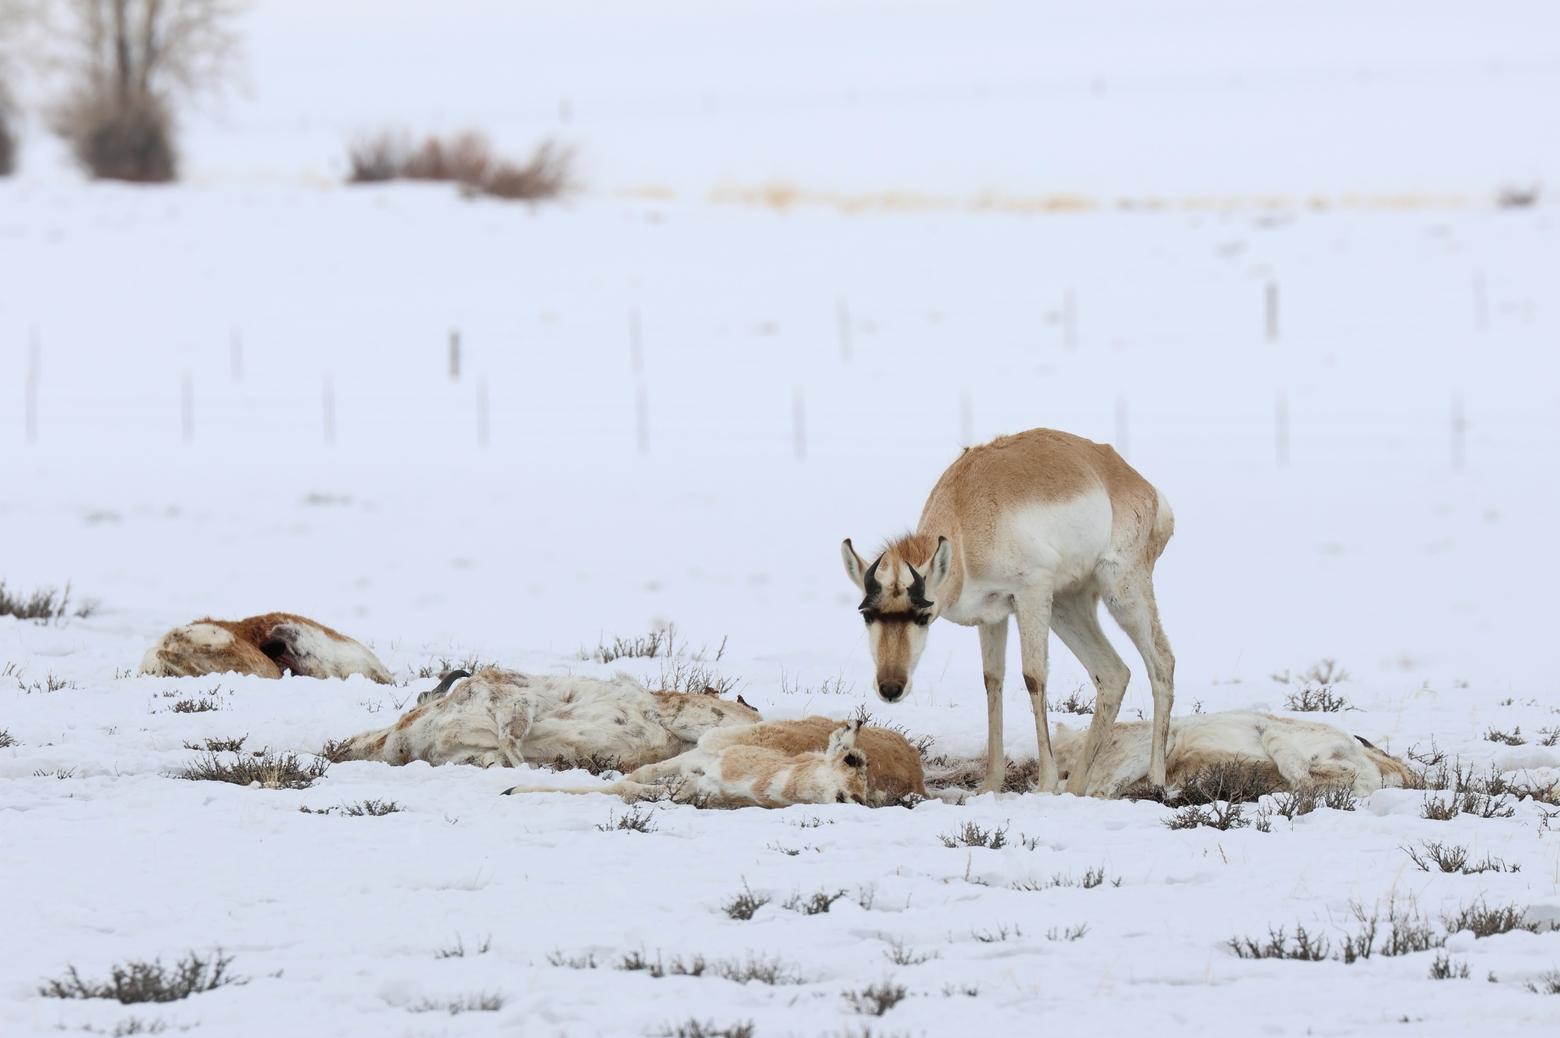 Pronghorn from the Sublette herd south of Pinedale, Wyoming, affected by the Mycoplasma bovis outbreak and the effects of a long winter. Photo by Mark Gocke